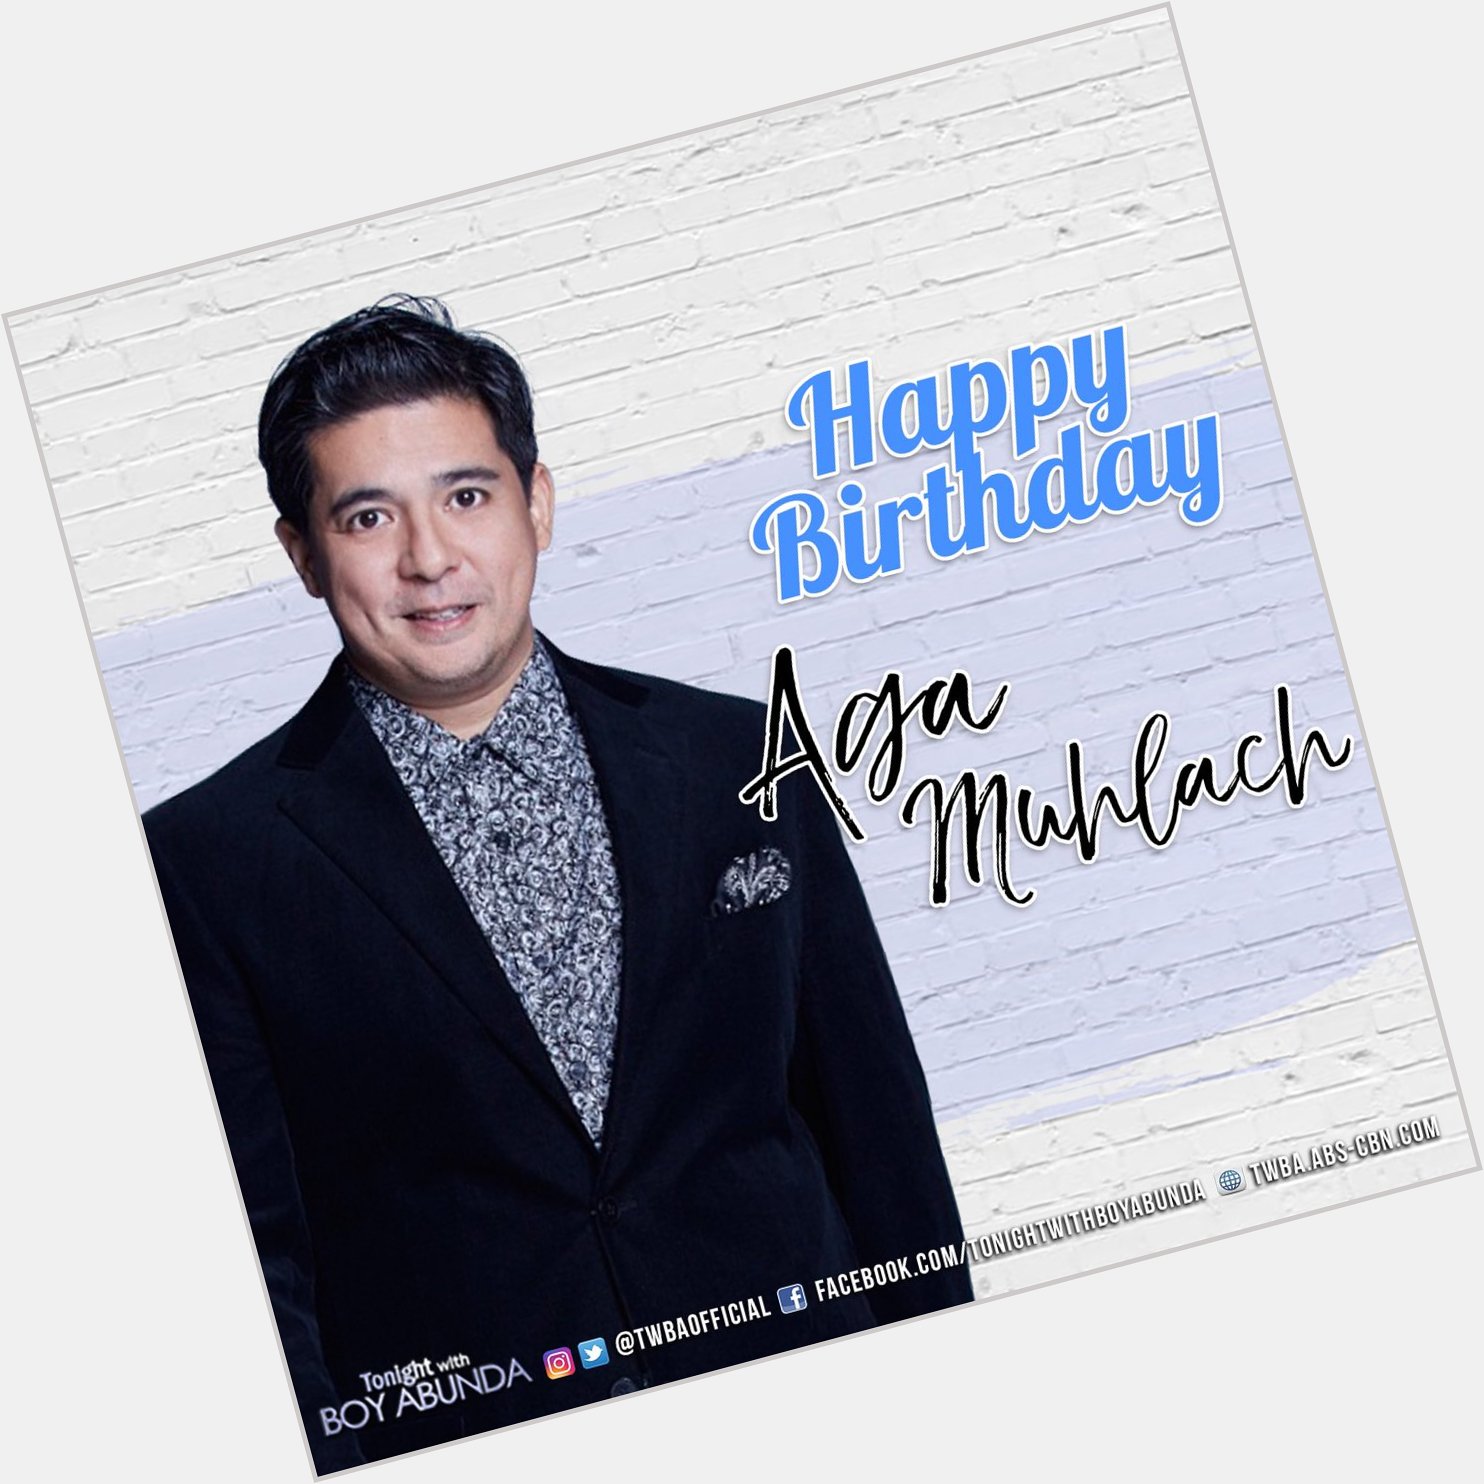 Happy Happy Birthday Aga Muhlach! We miss you on the show! Hope to see you soon! 